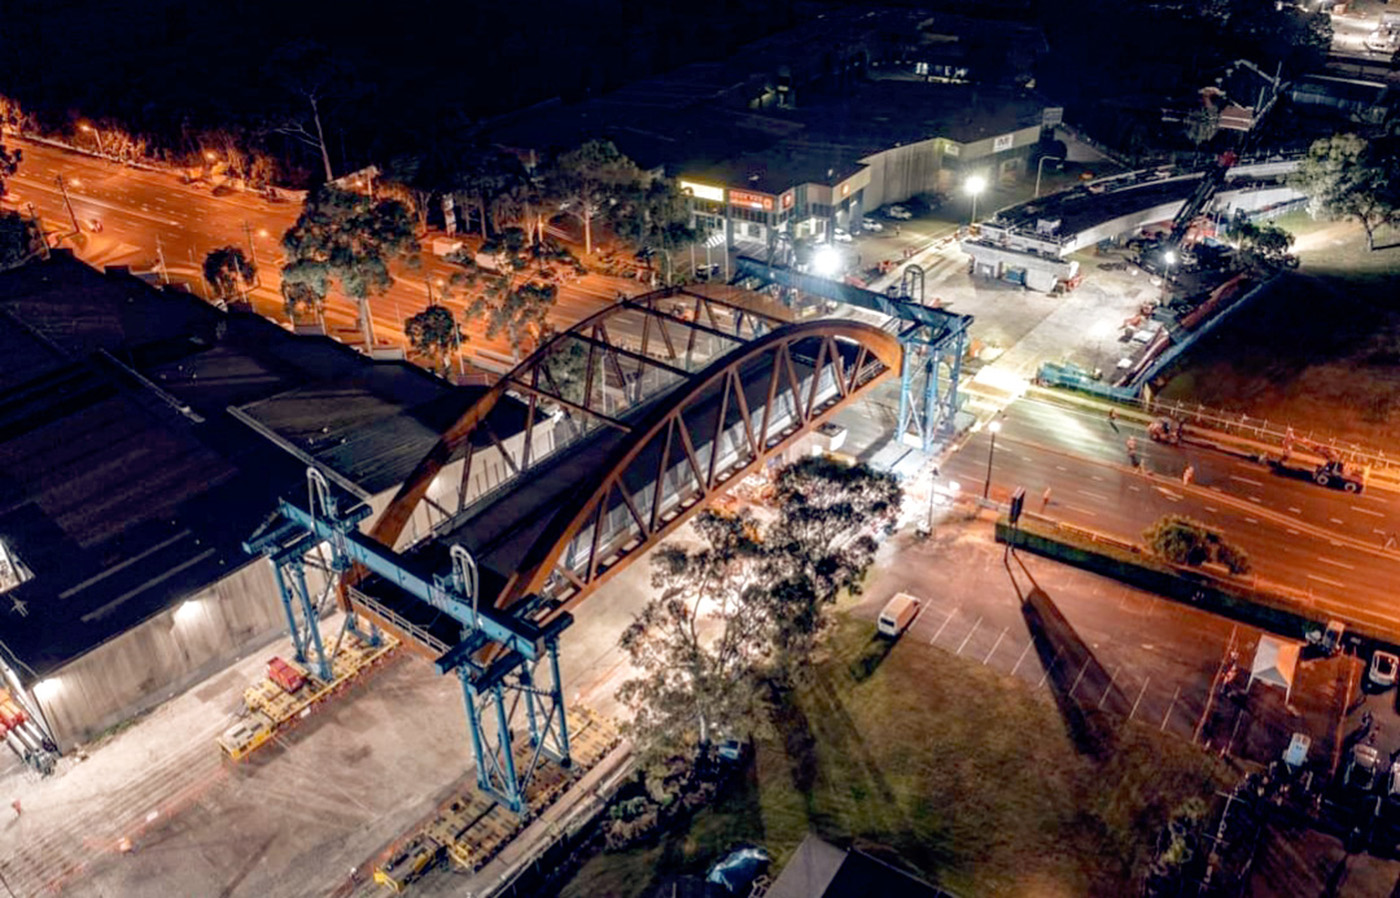 Main arch being lifted case civil and structural engineering project parramatta light rail